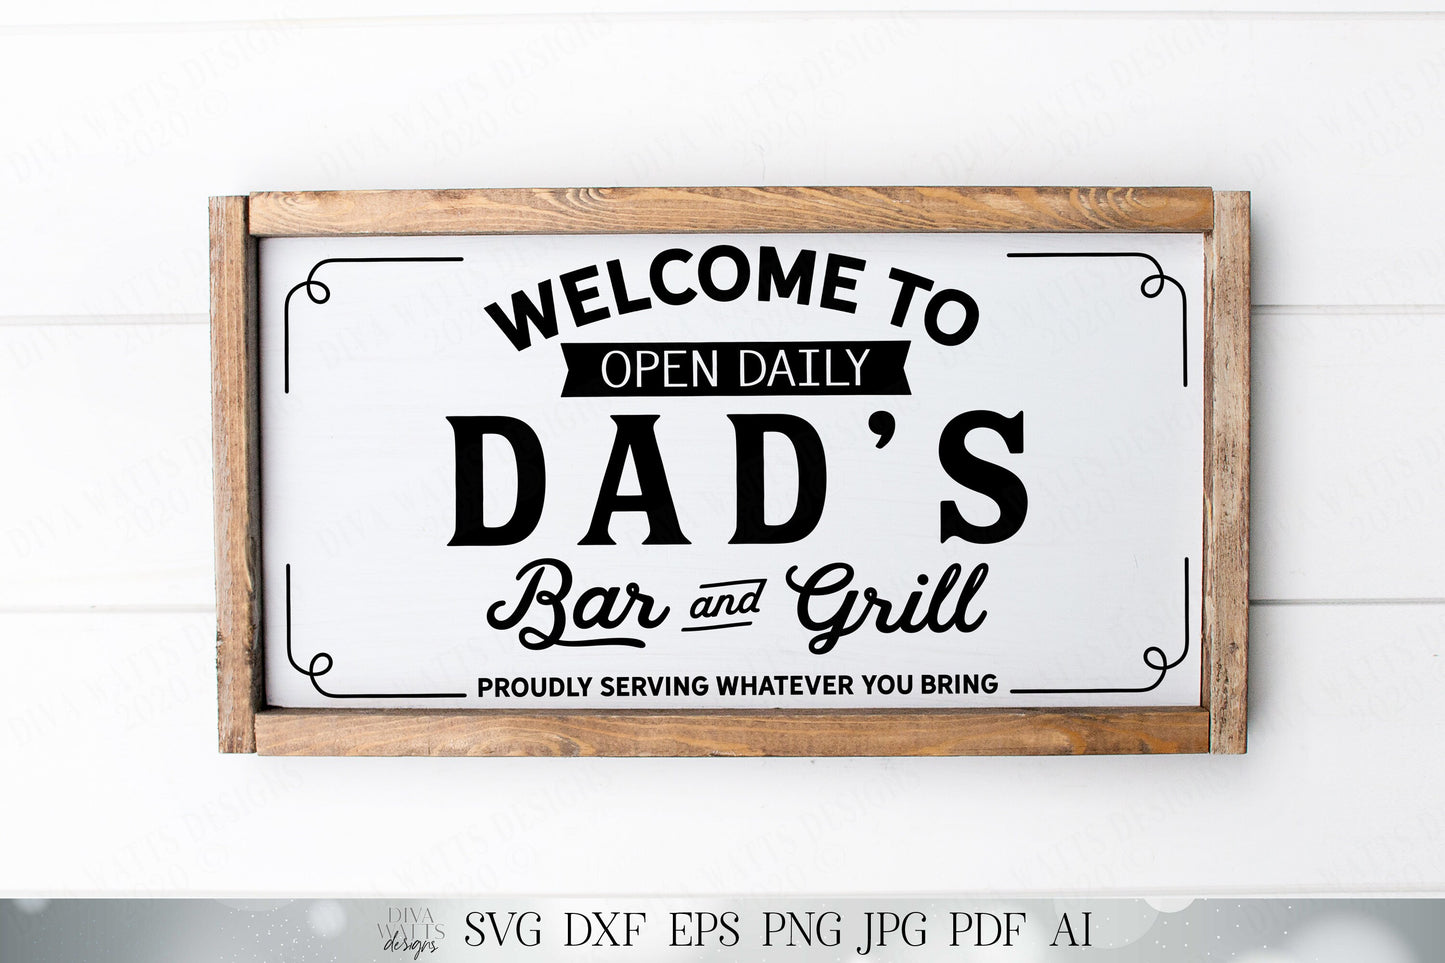 Welcome To Dad's Bar and Grill - Proudly Serving What You Bring - Farmhouse Sign - Cutting File - SVG DXF JPG and More!